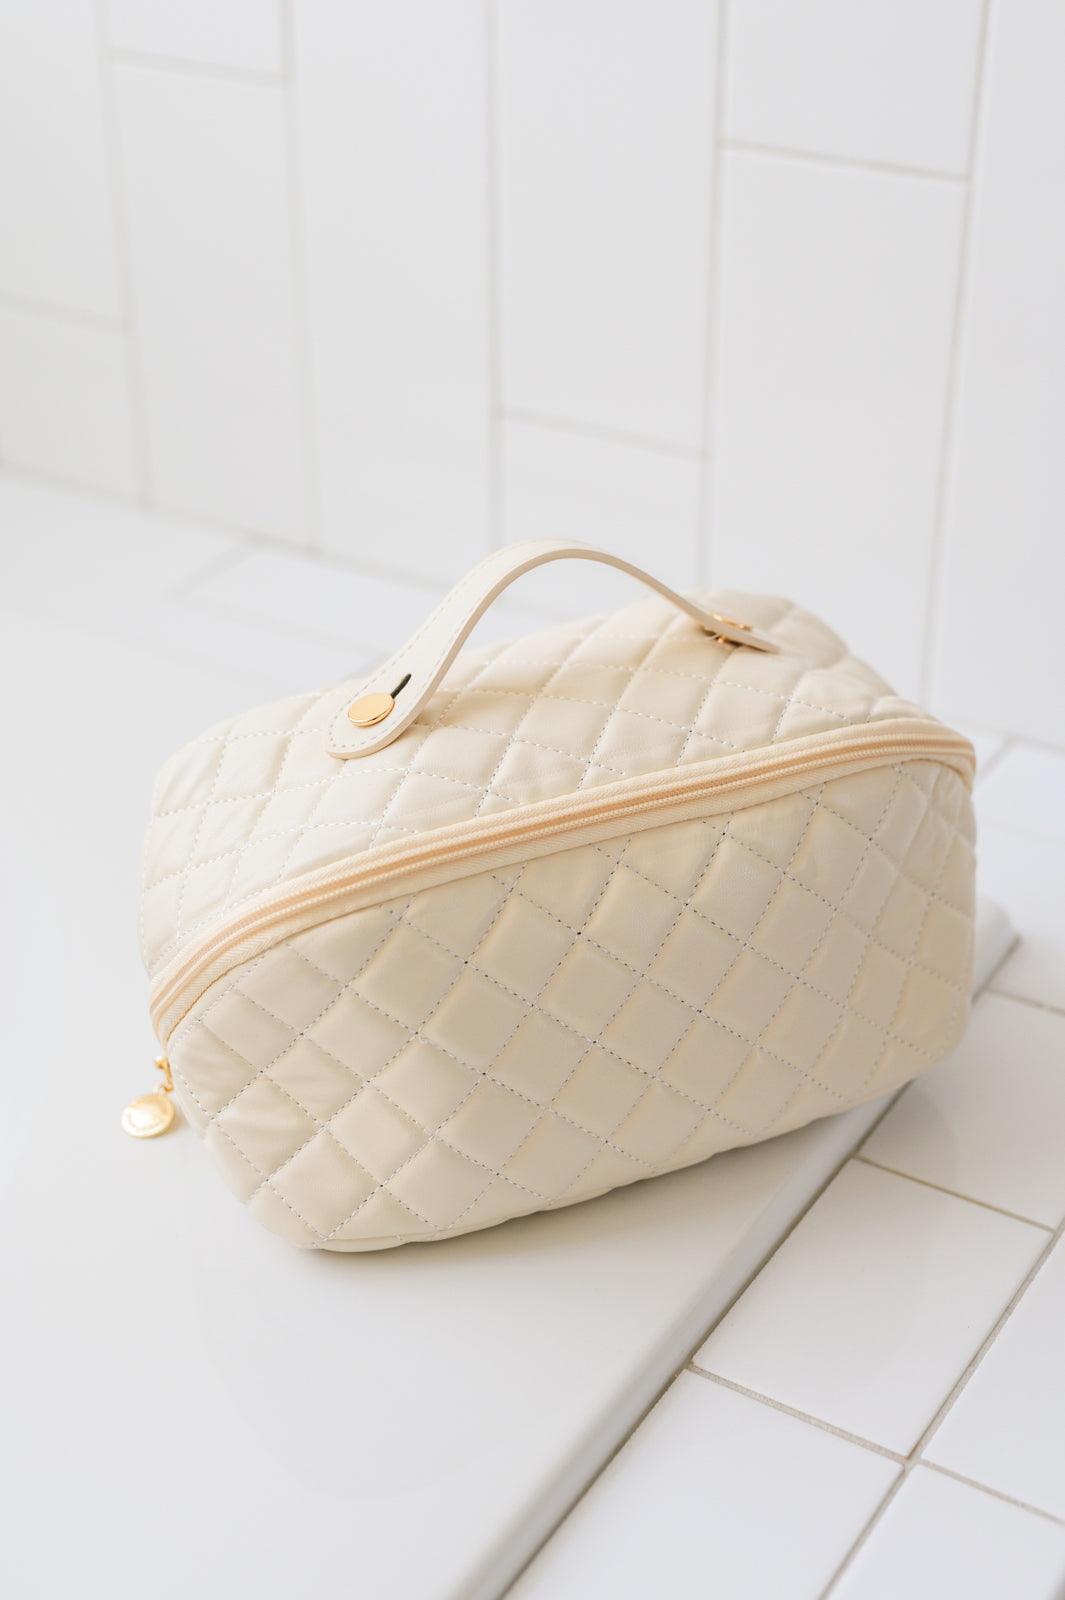 Large Capacity Quilted Makeup Bag in Cream OS Cream Makeup Bags